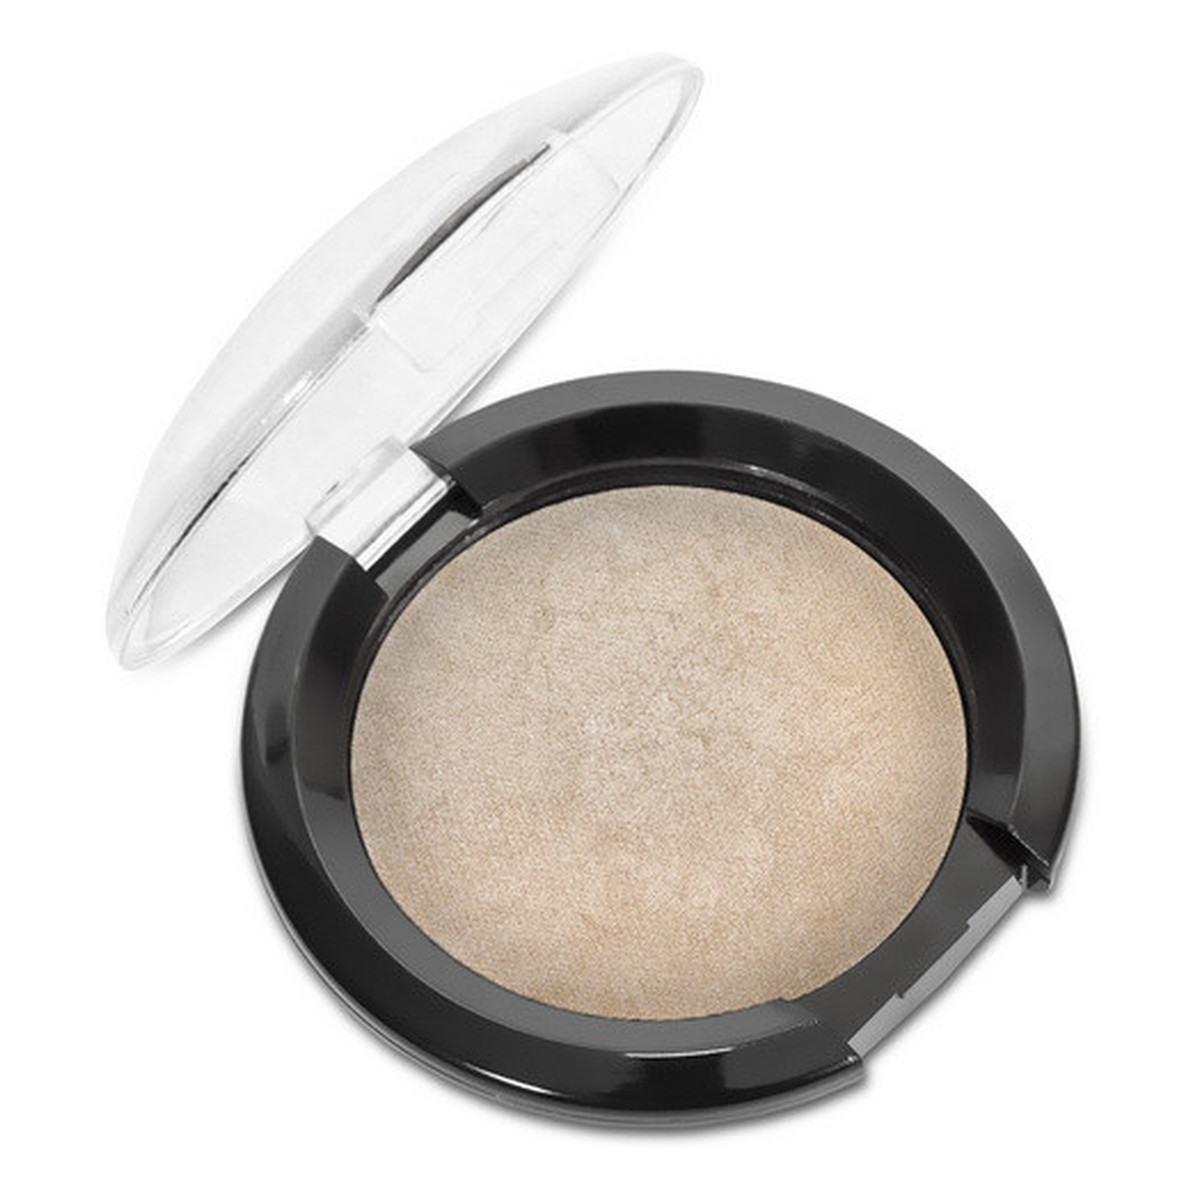 Affect MINERAL BAKED POWDER Mineralny Puder Wypiekany (T-0001)